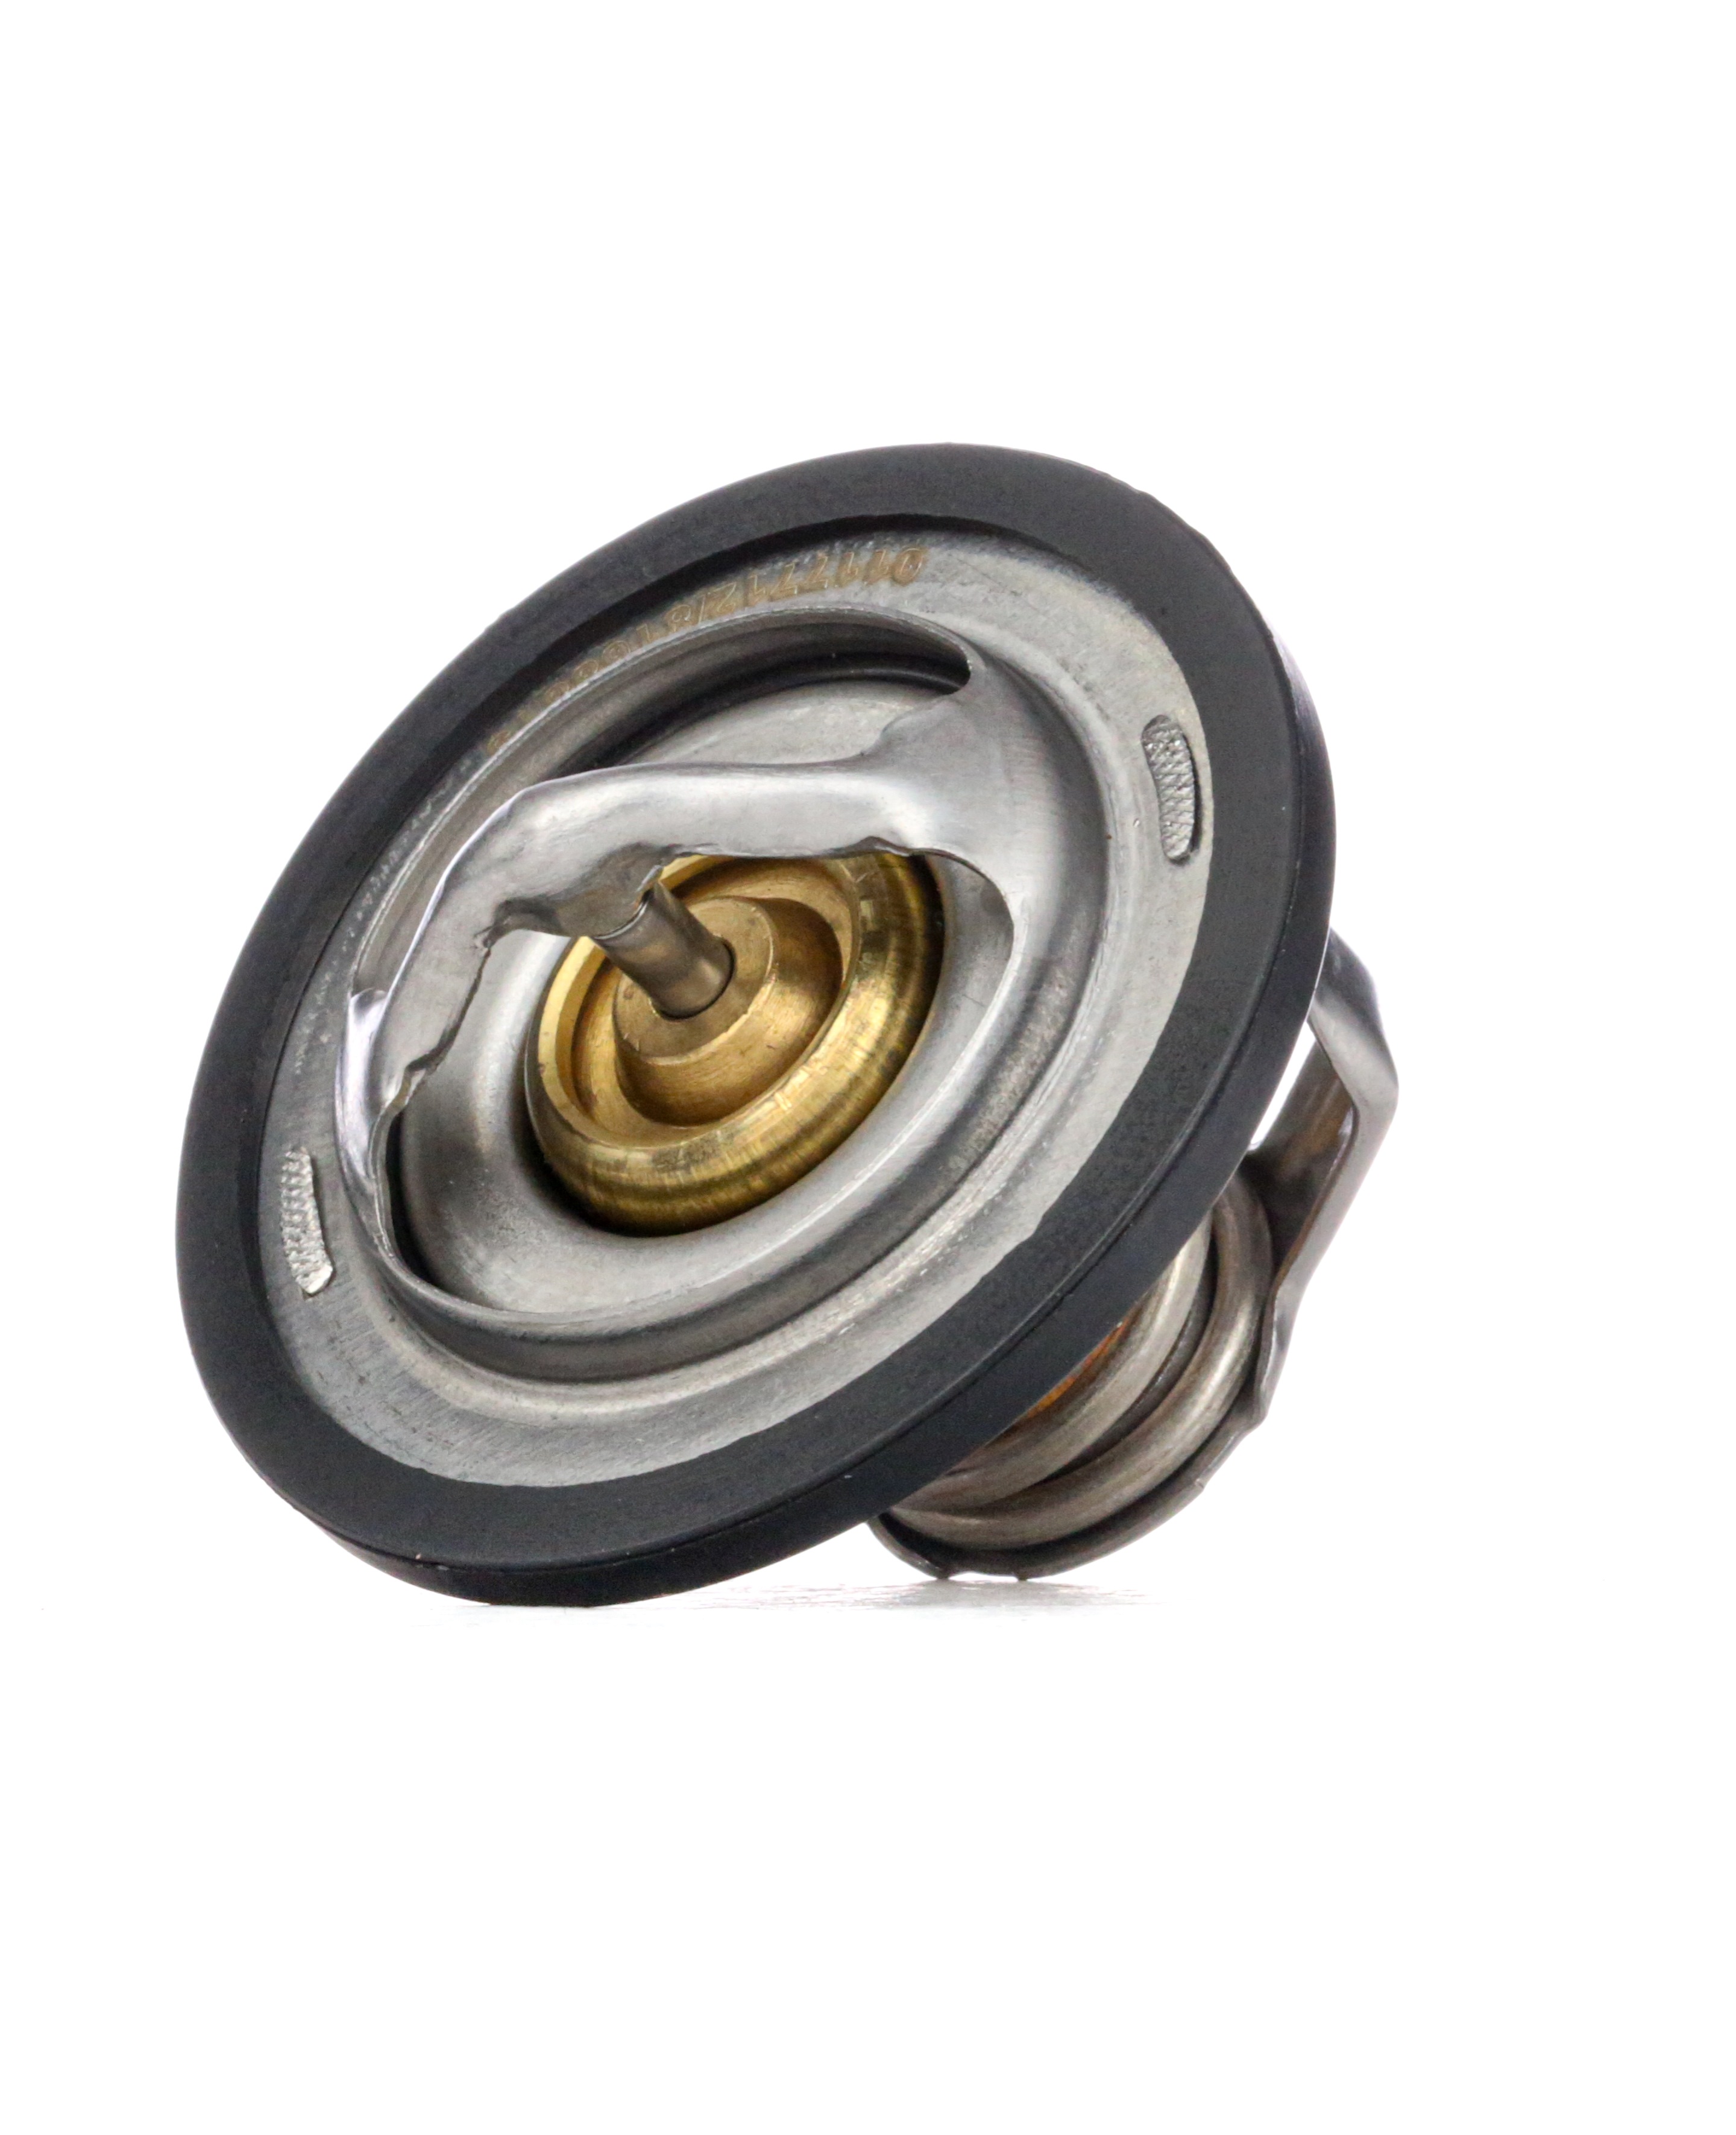 STARK SKTC-0560162 Engine thermostat Opening Temperature: 83°C, with seal